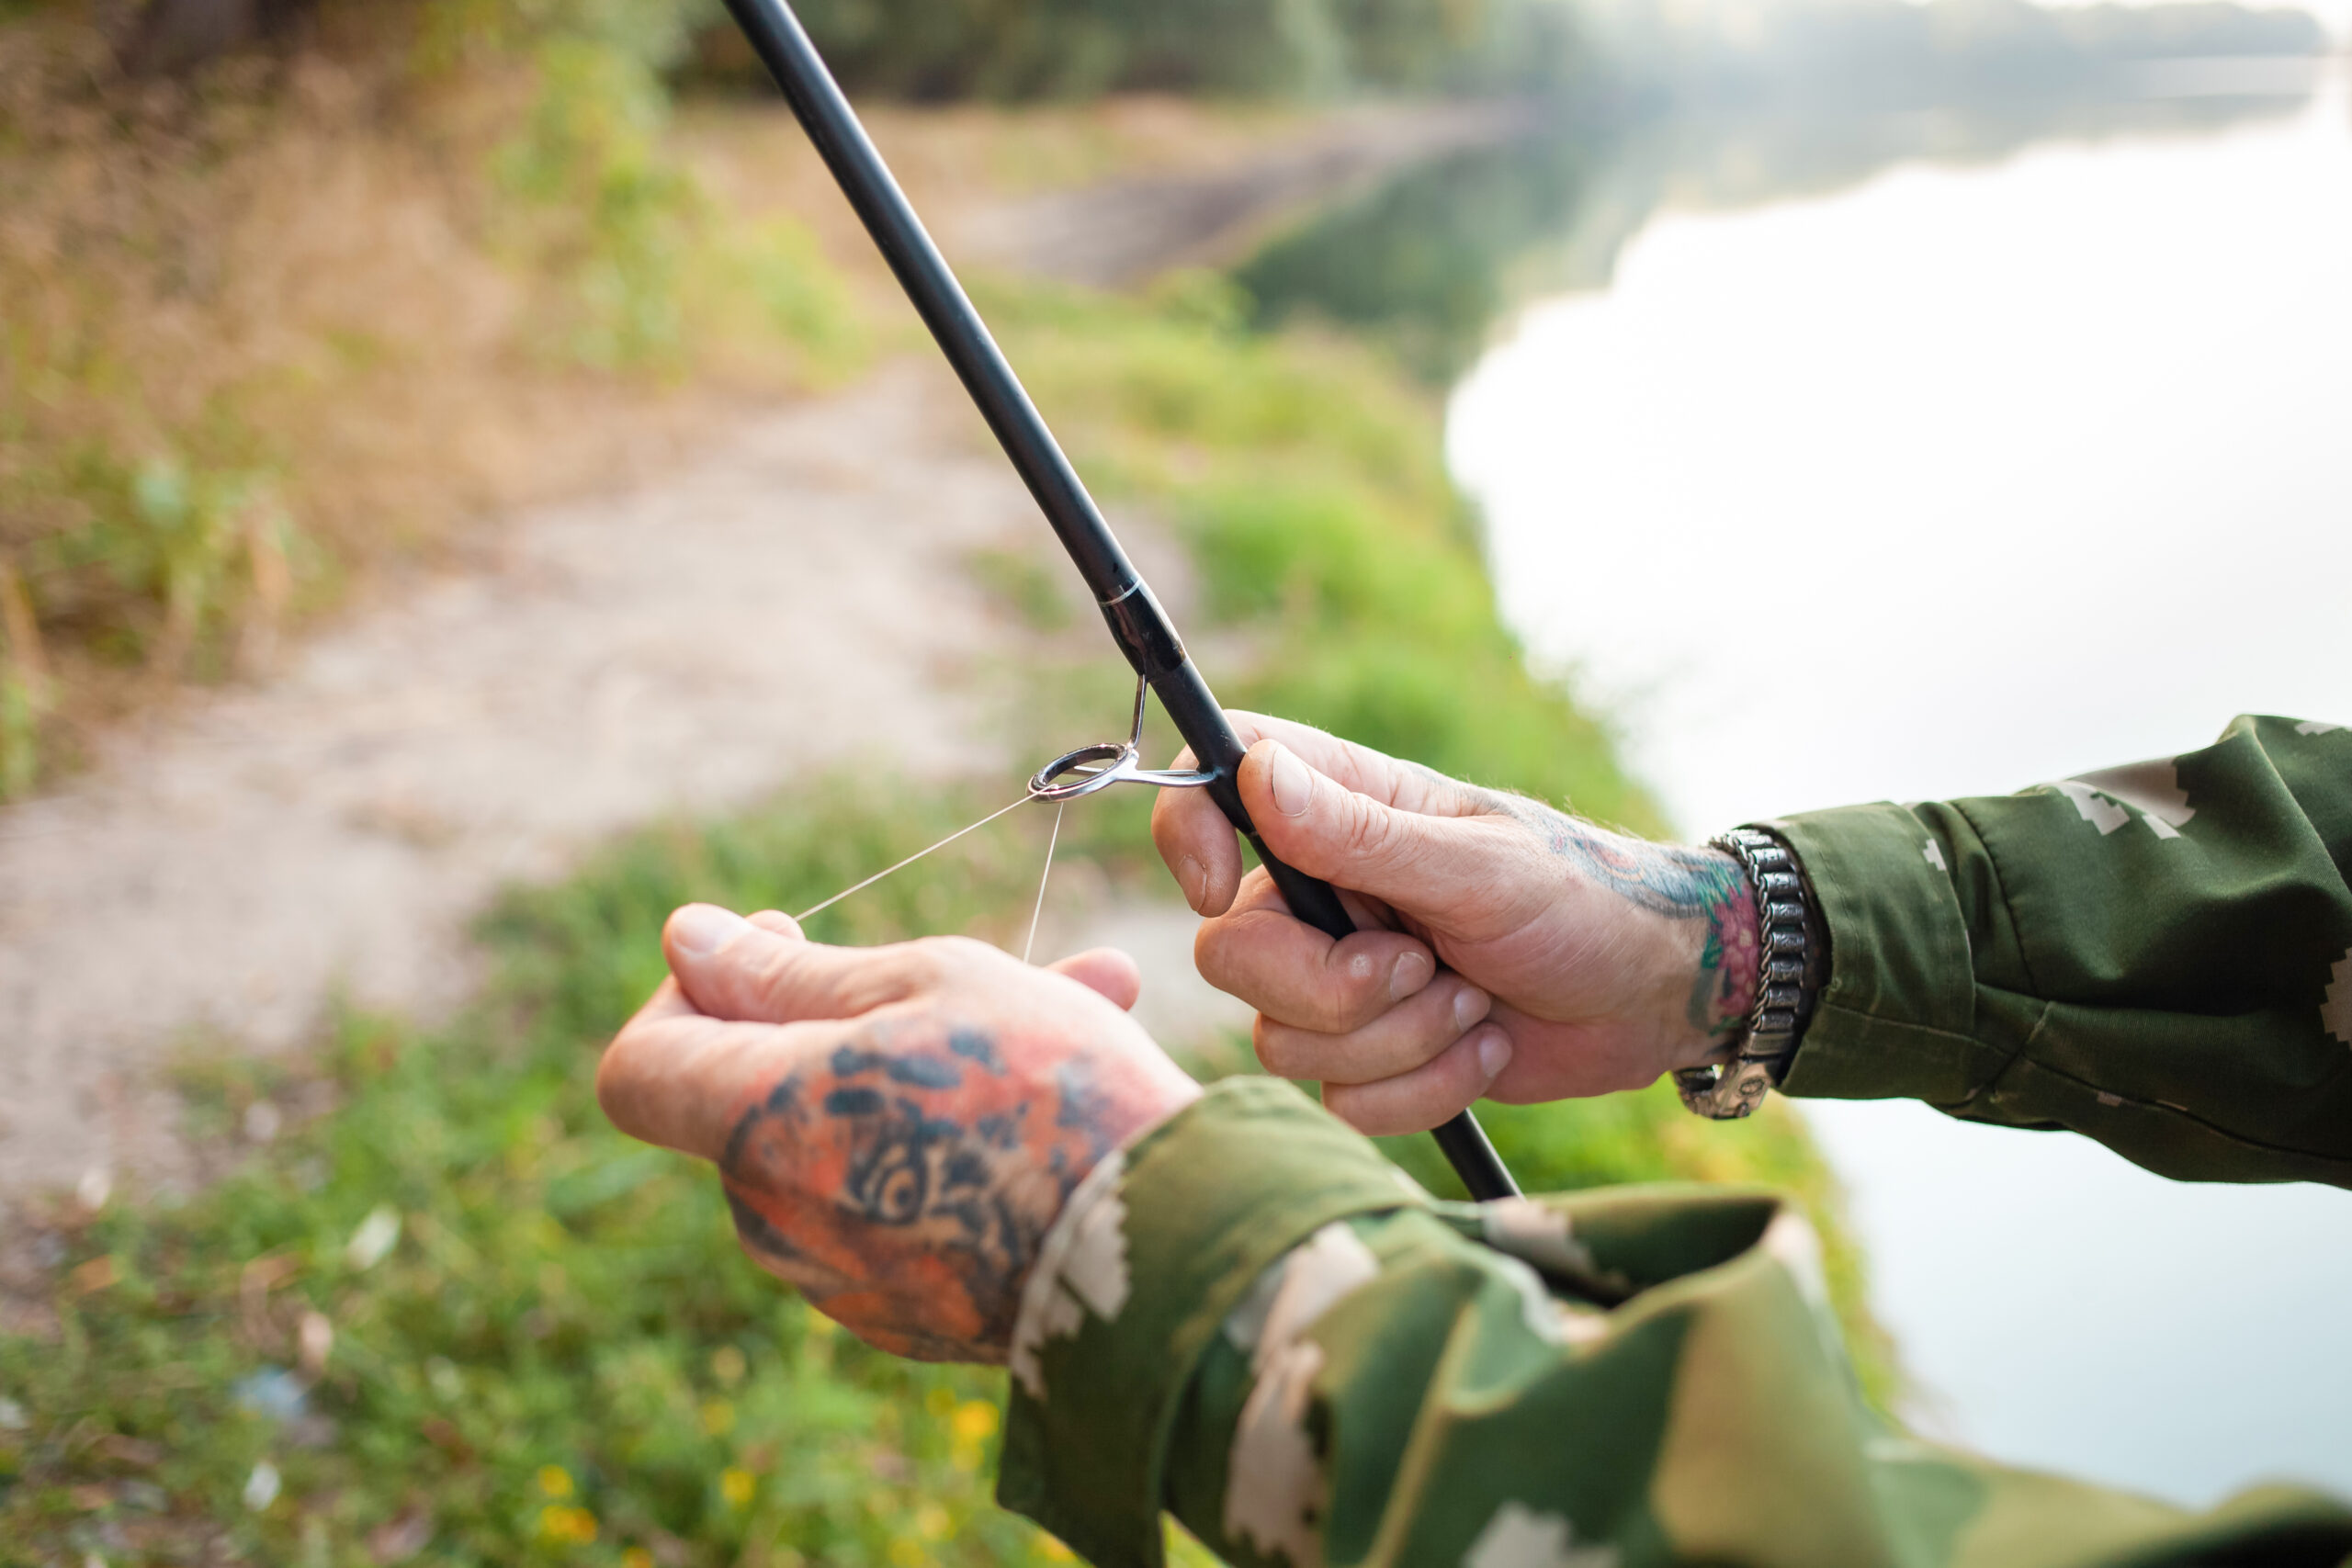 fanatic4fishing.com : What is the difference between a fishing pole and a fishing rod?